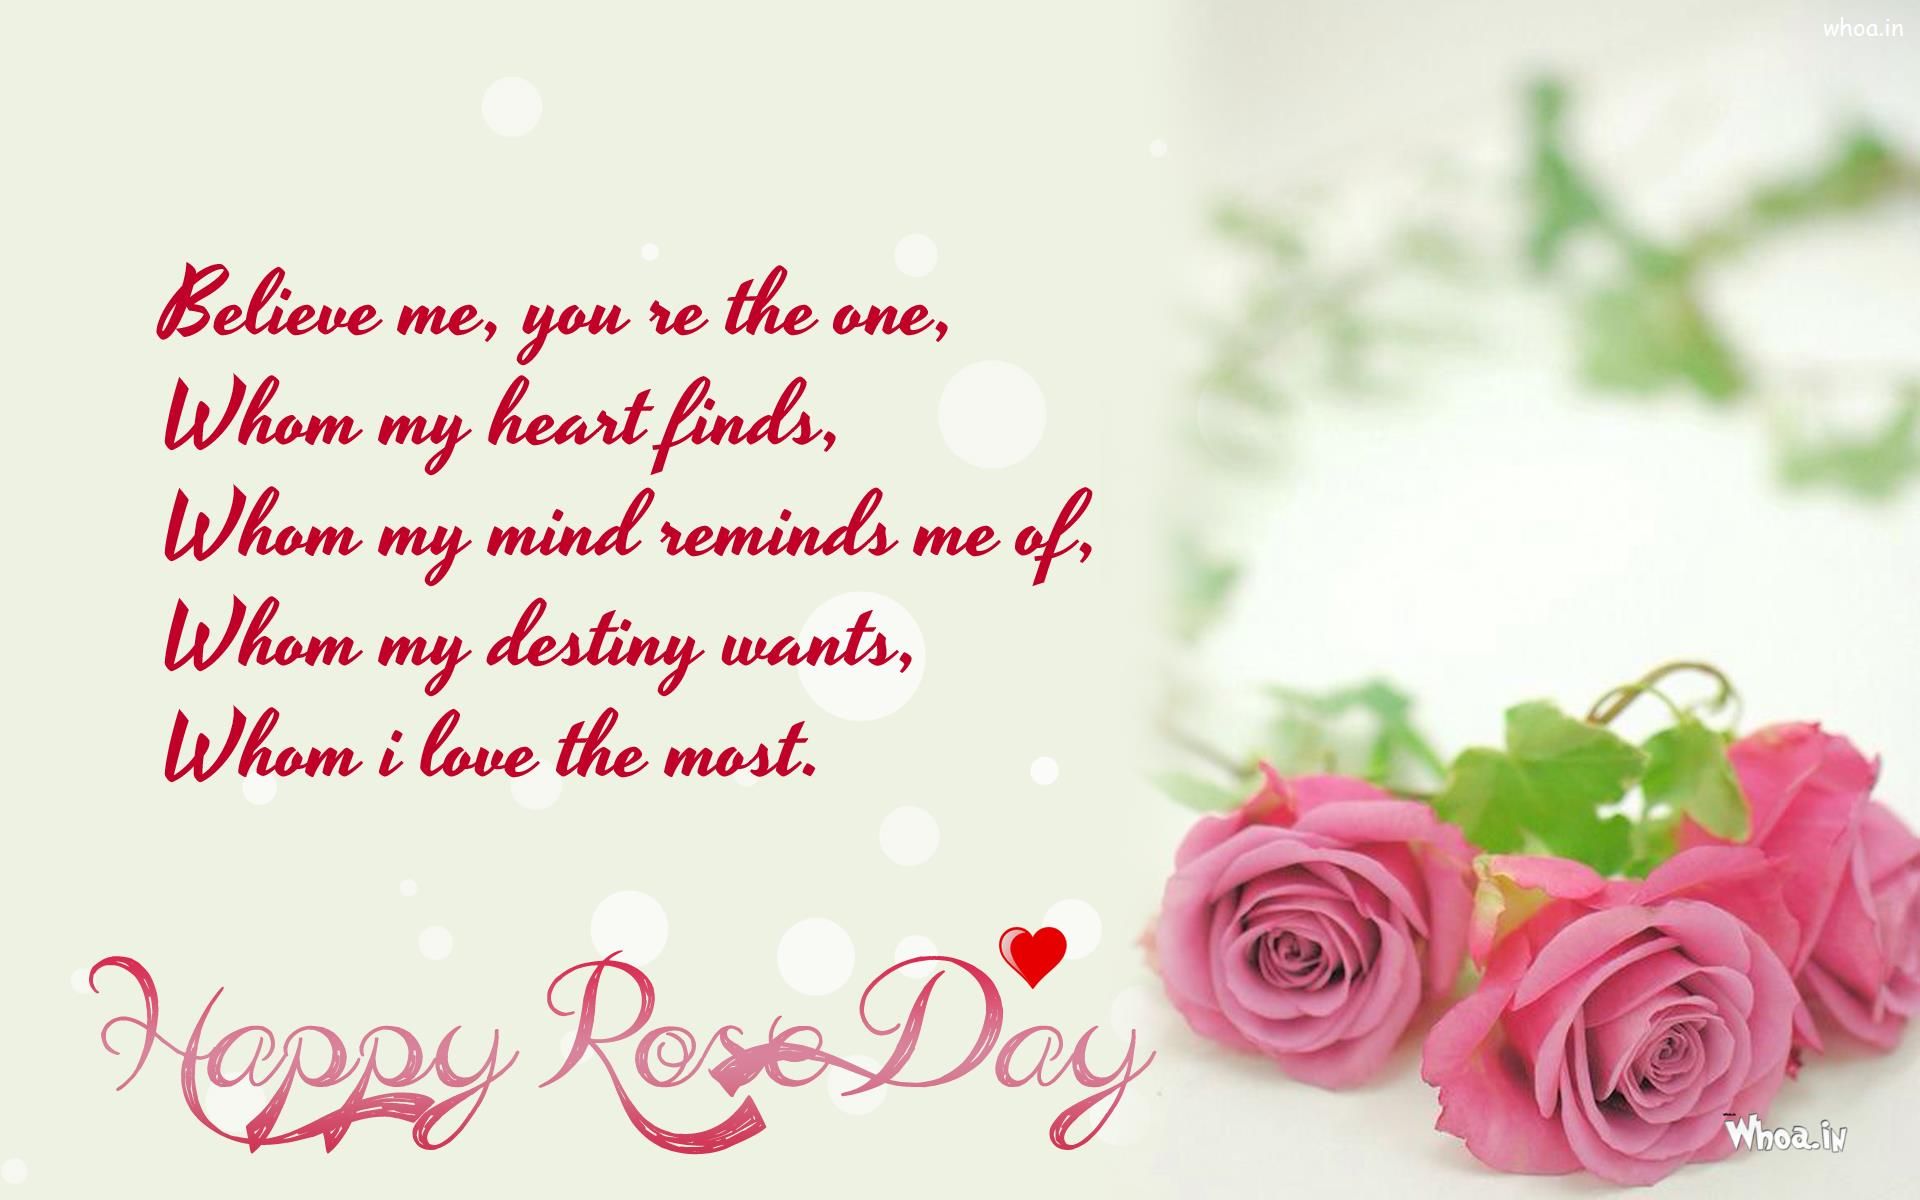 Happy Rose Day Messages for Wife 2021